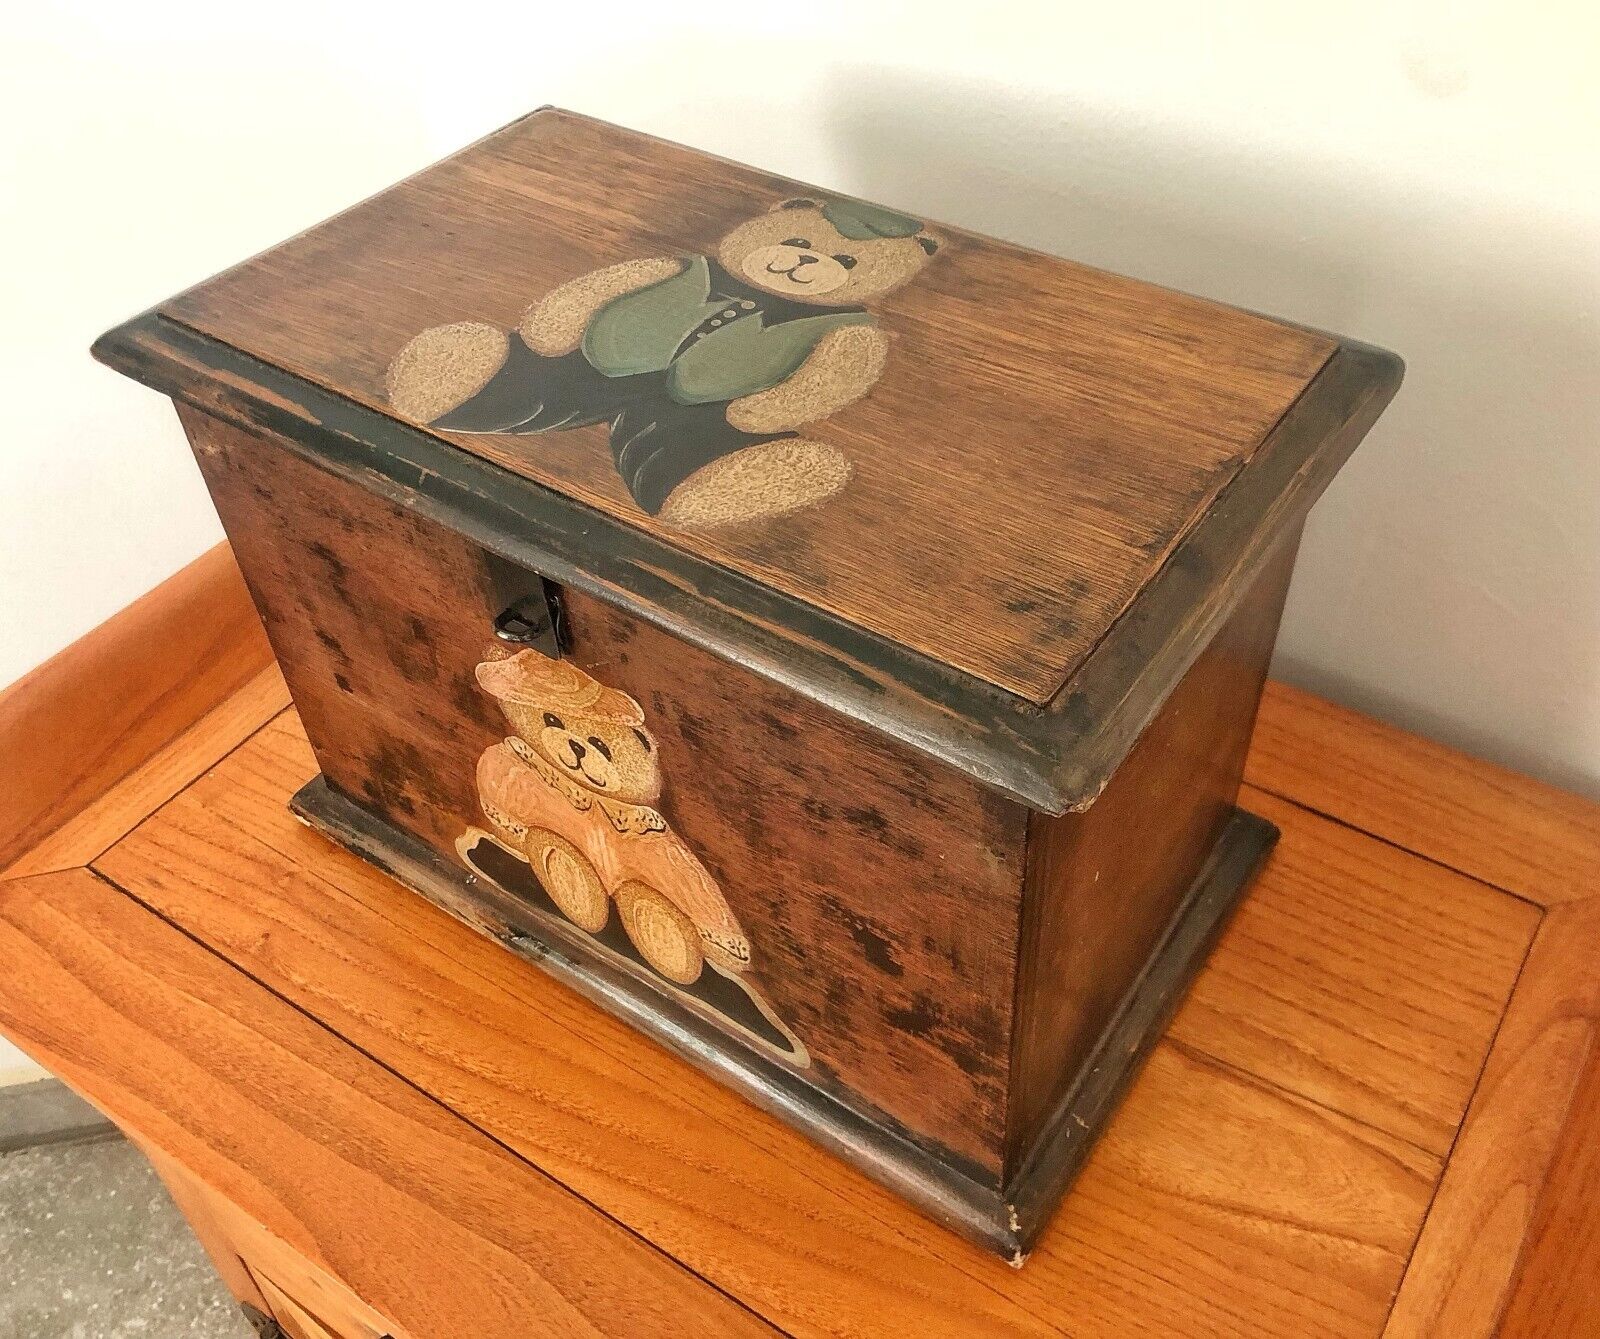 Wooden toy/memento box, bear themed, birthday or Christmas gift for girl or boy,